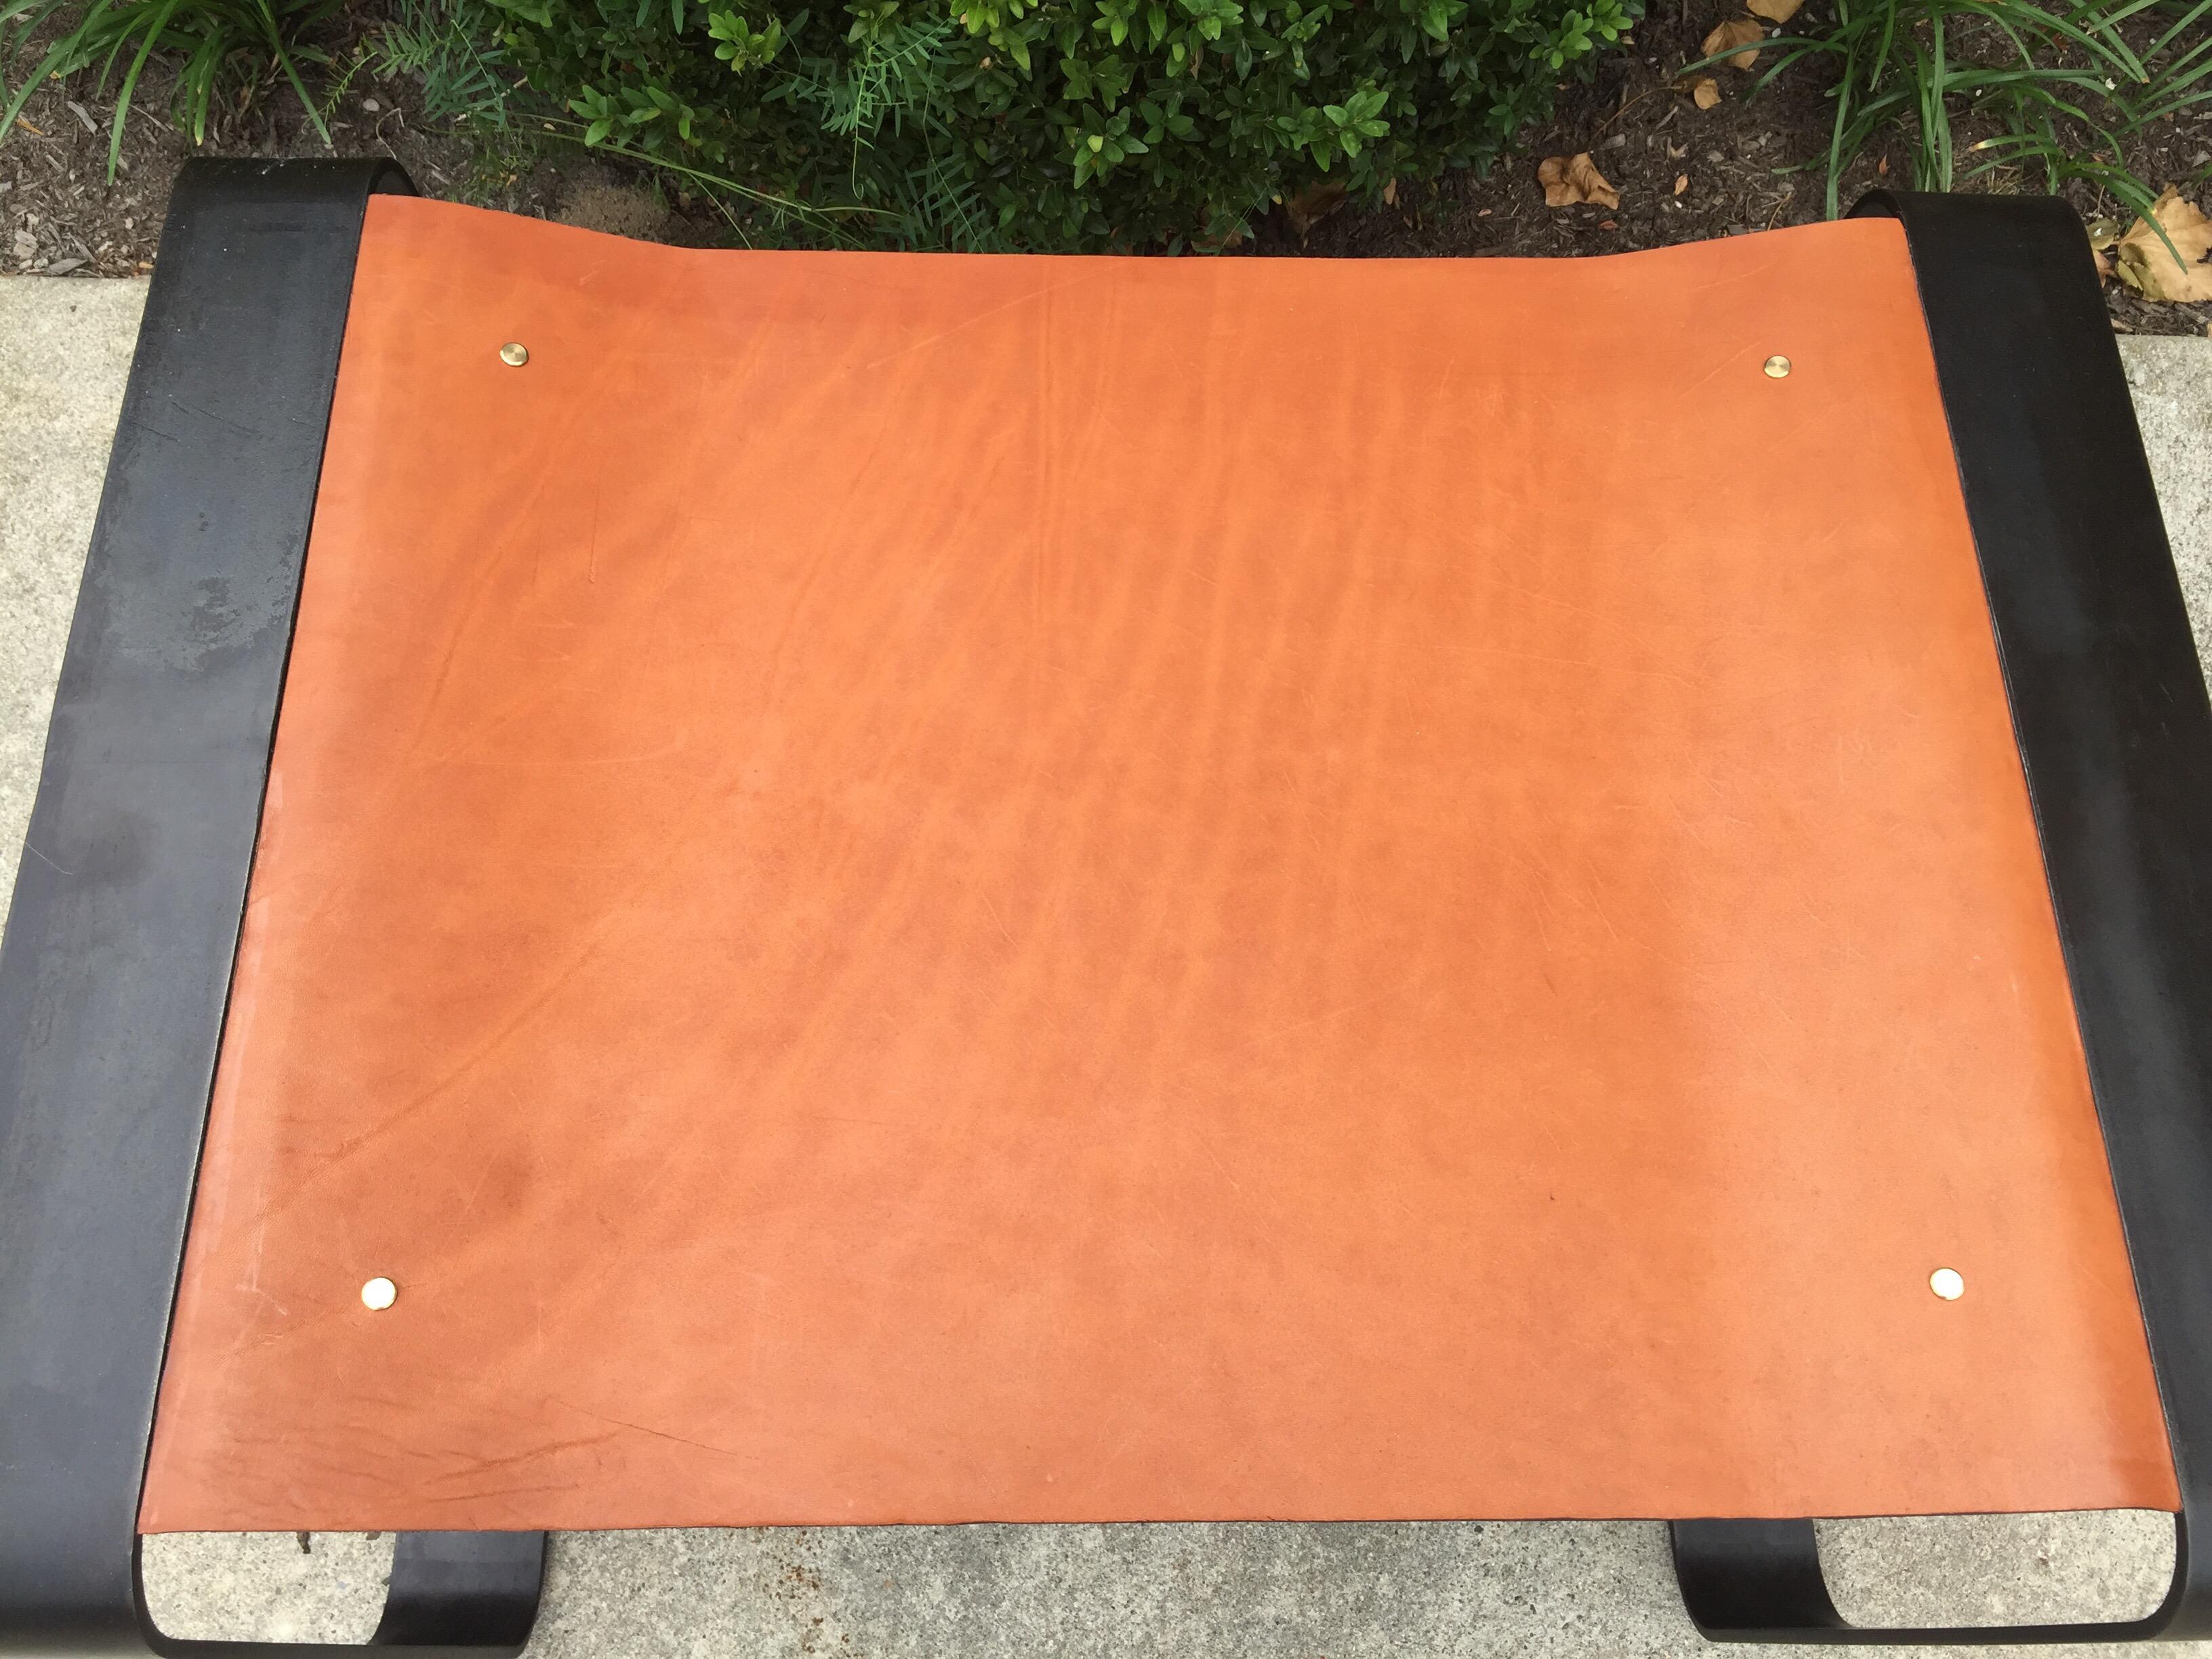 American Bent Flat Iron Bench with Cognac Leather Seat For Sale